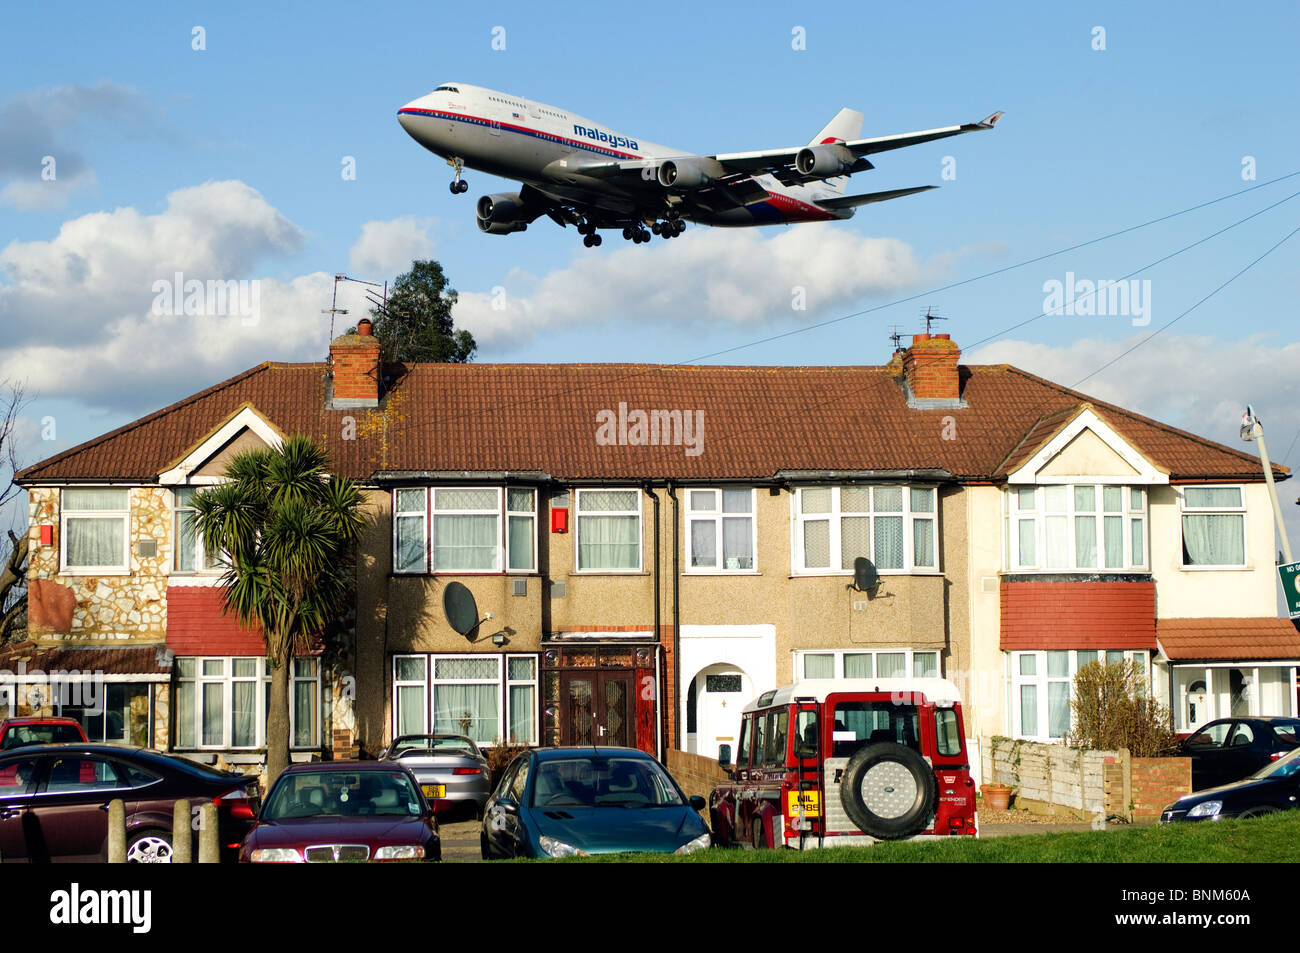 Heathrow runway aproach by Boeing 747, Malaysia Airlines, on approach low over houses for landing at London Heathrow Airport, Myrtle Avenue, UK. Stock Photo